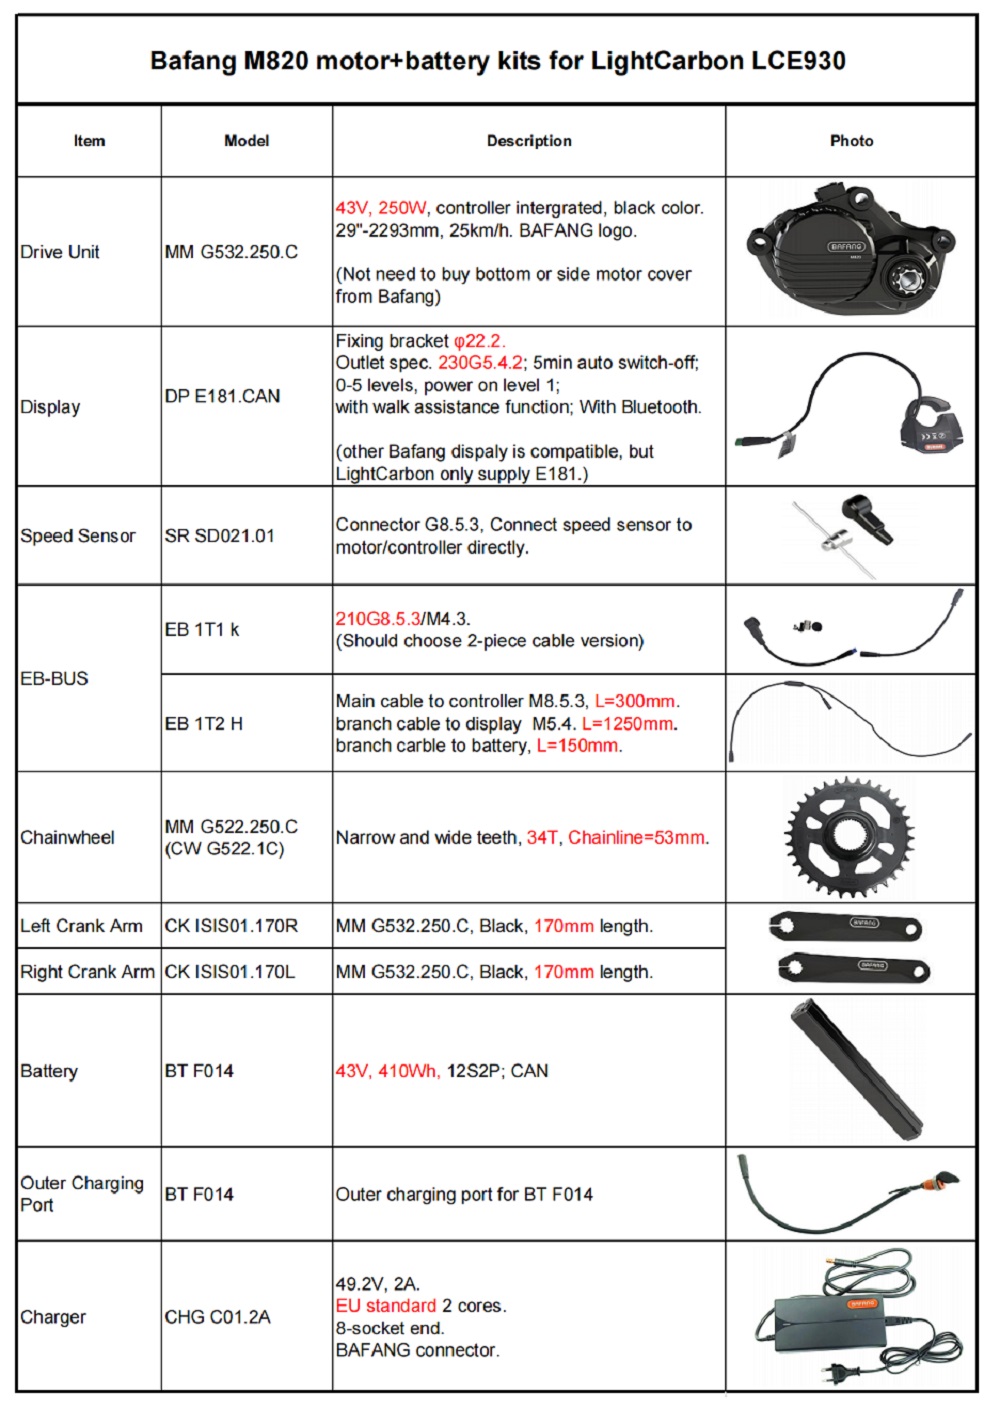 LCE930 suitable Bafang M820 motor+battery kits specification